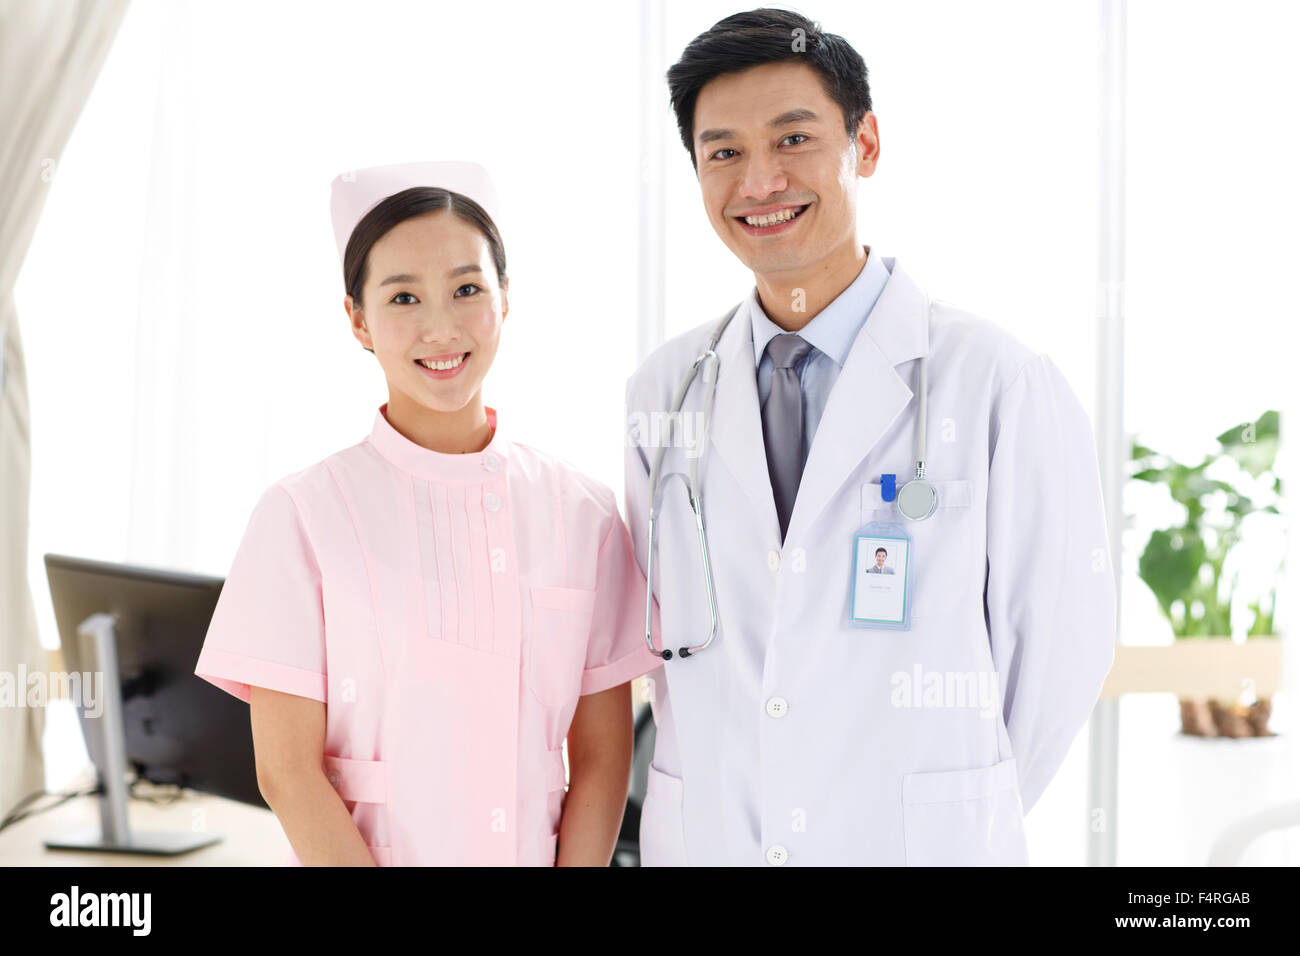 Health care workers Stock Photo